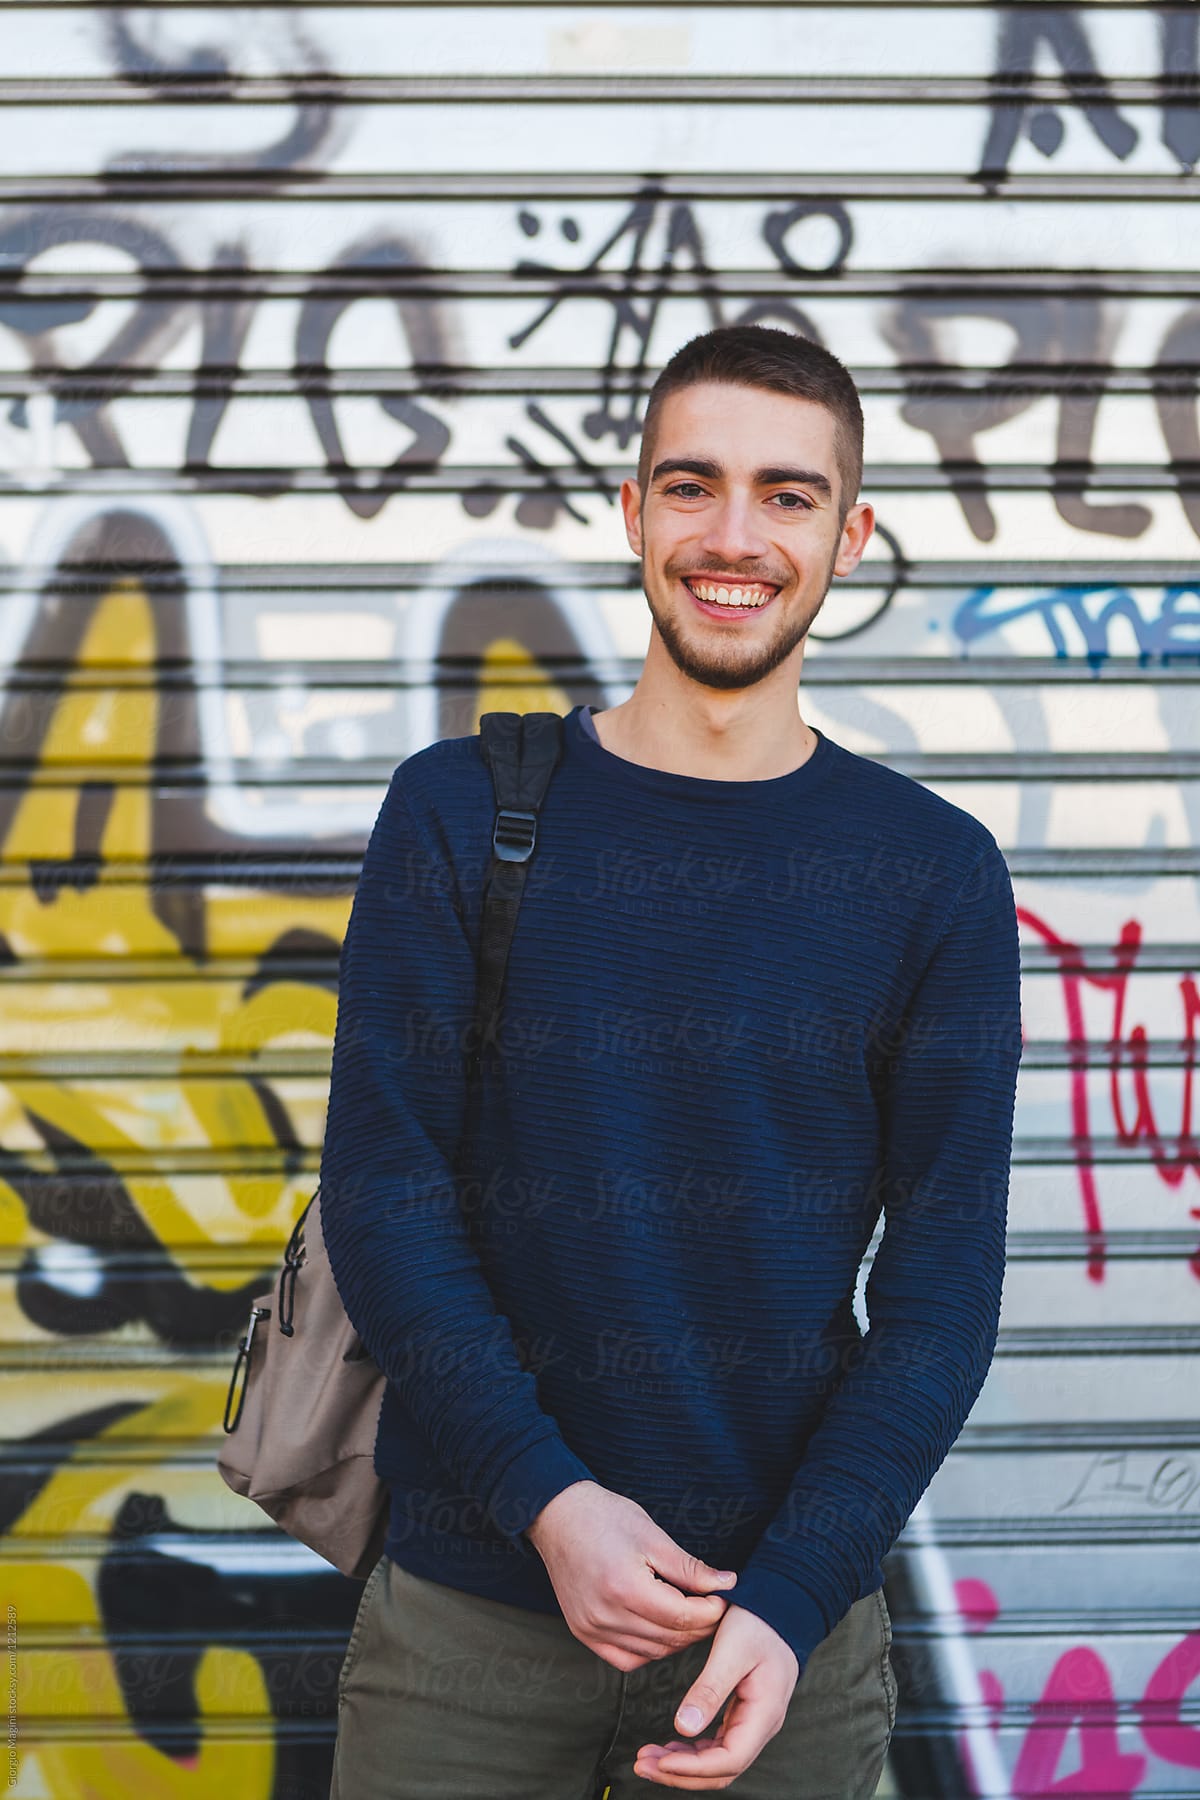 Smiling Young Man Portrait in Urban Area